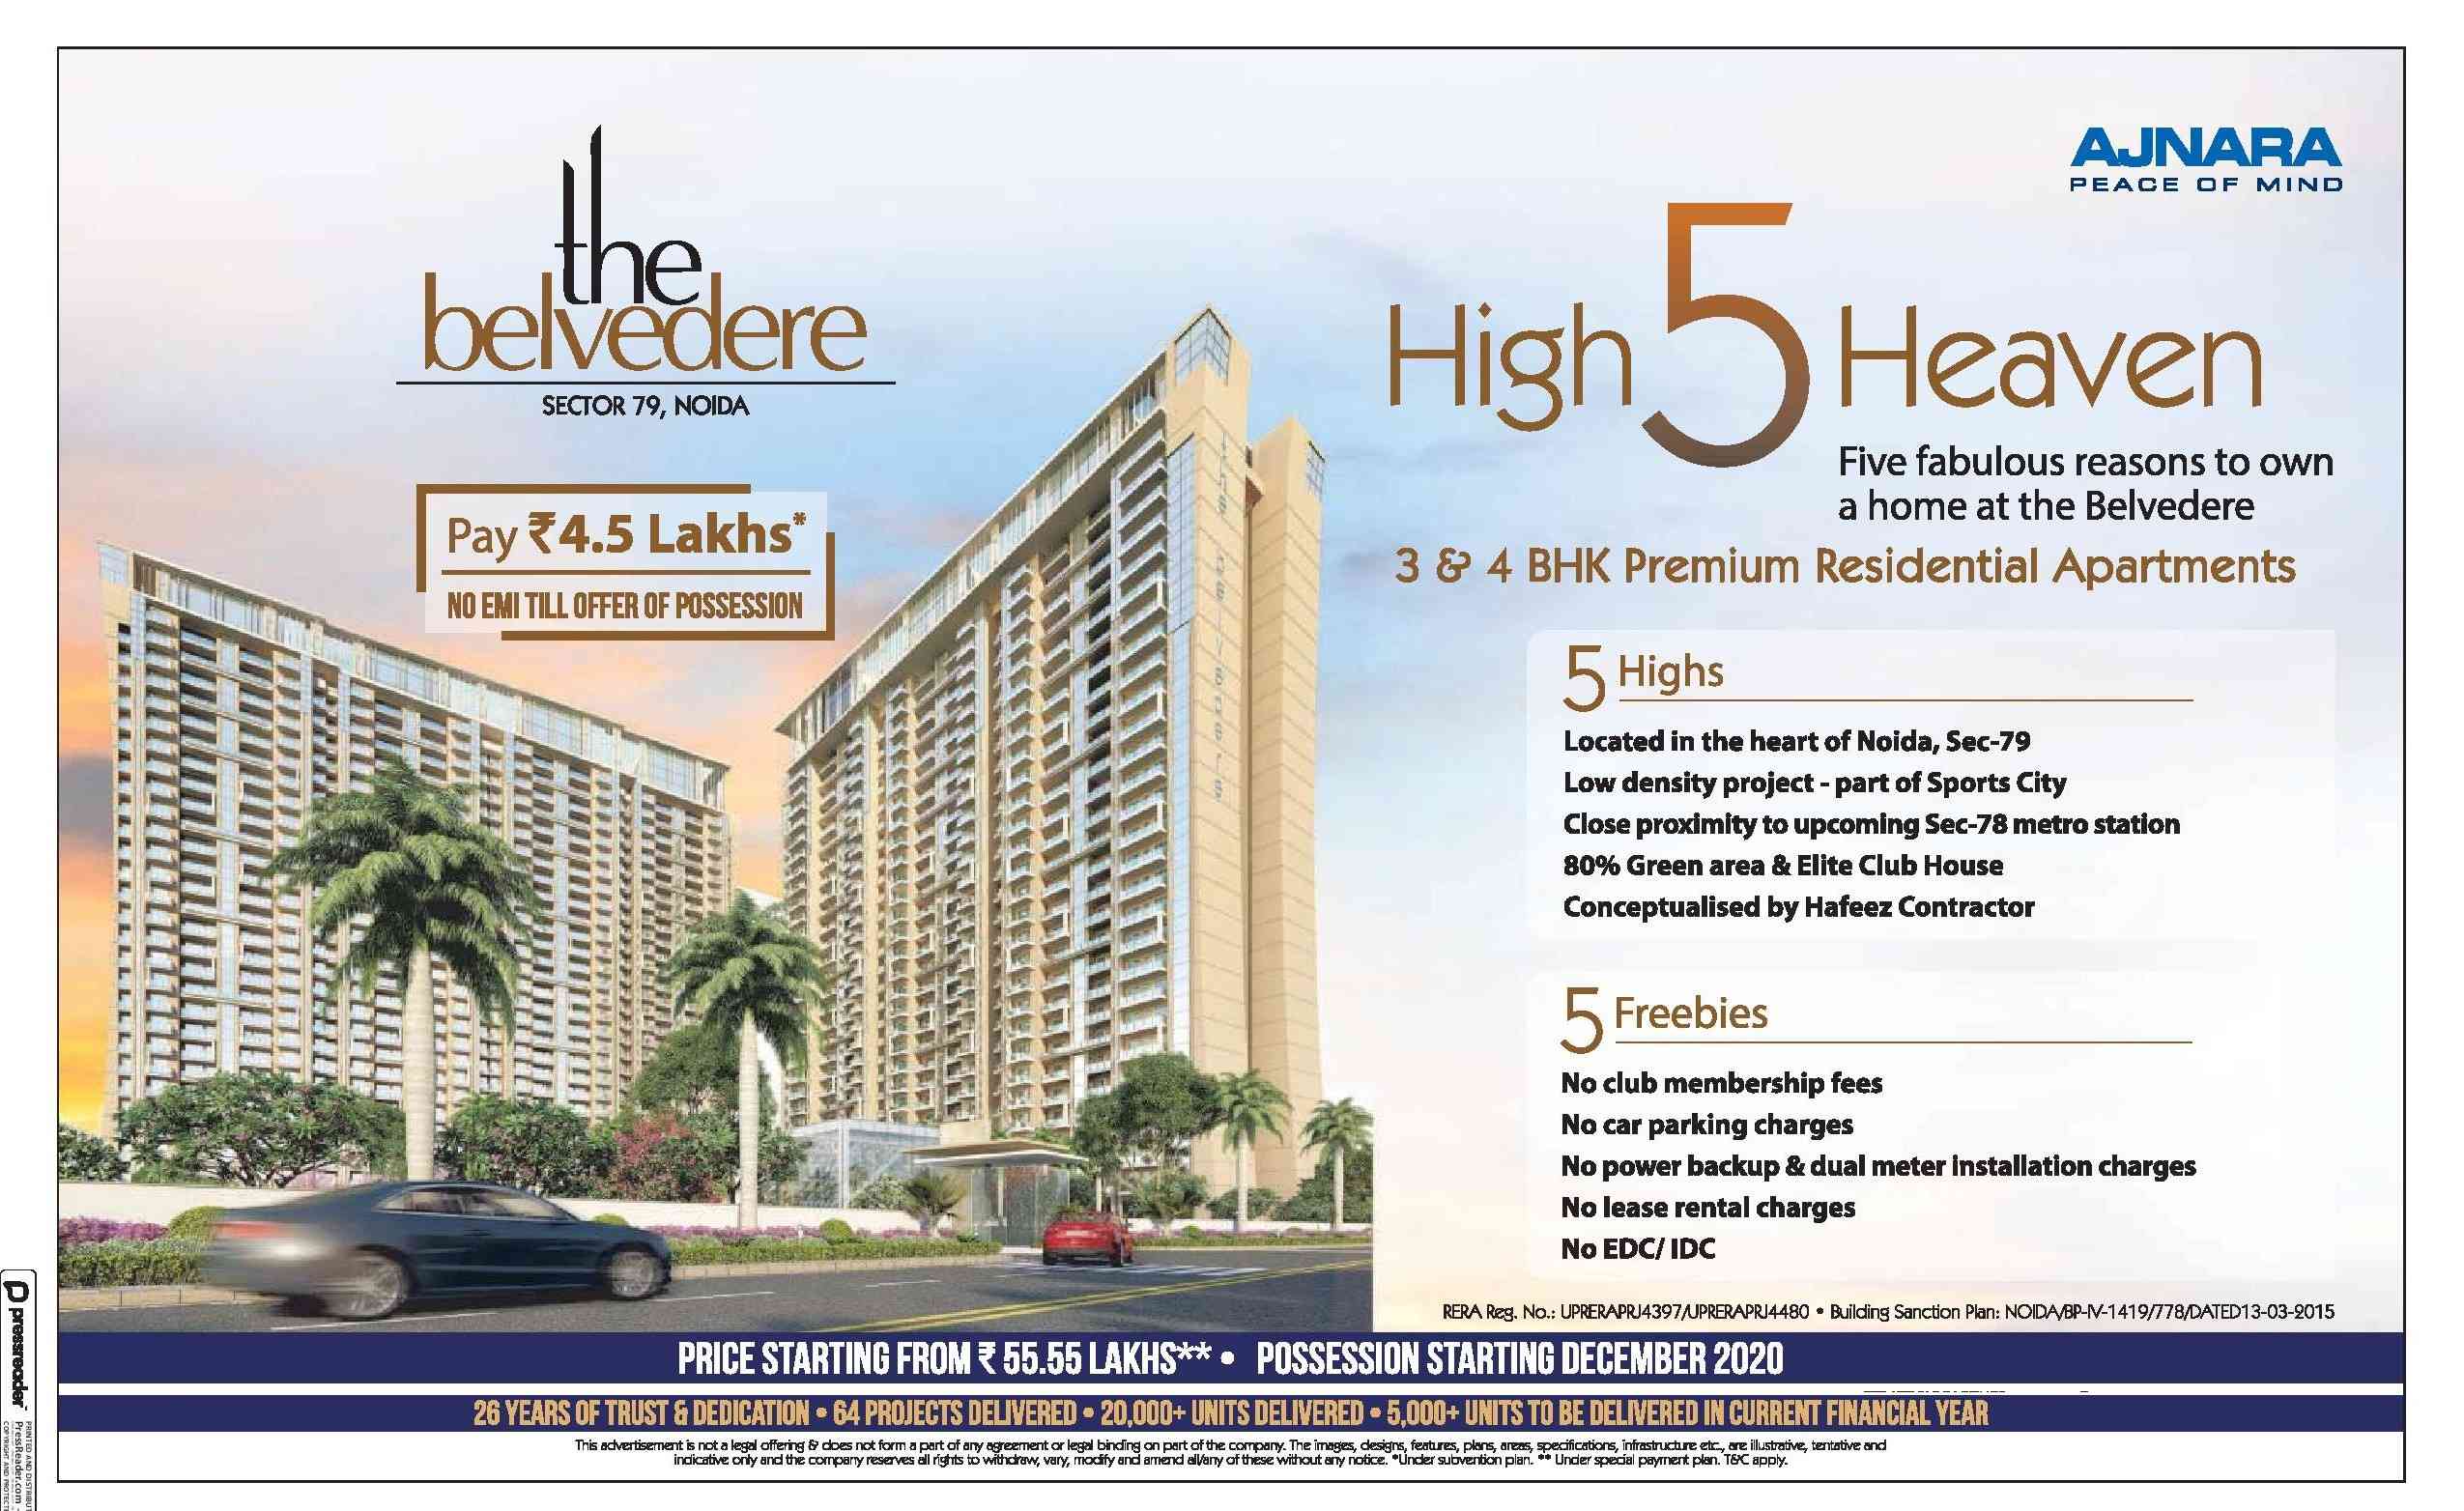 Pay Rs 4.5 Lakhs & no EMI till offer of possession at Ajnara The Belvedere in Sector 79, Noida Update